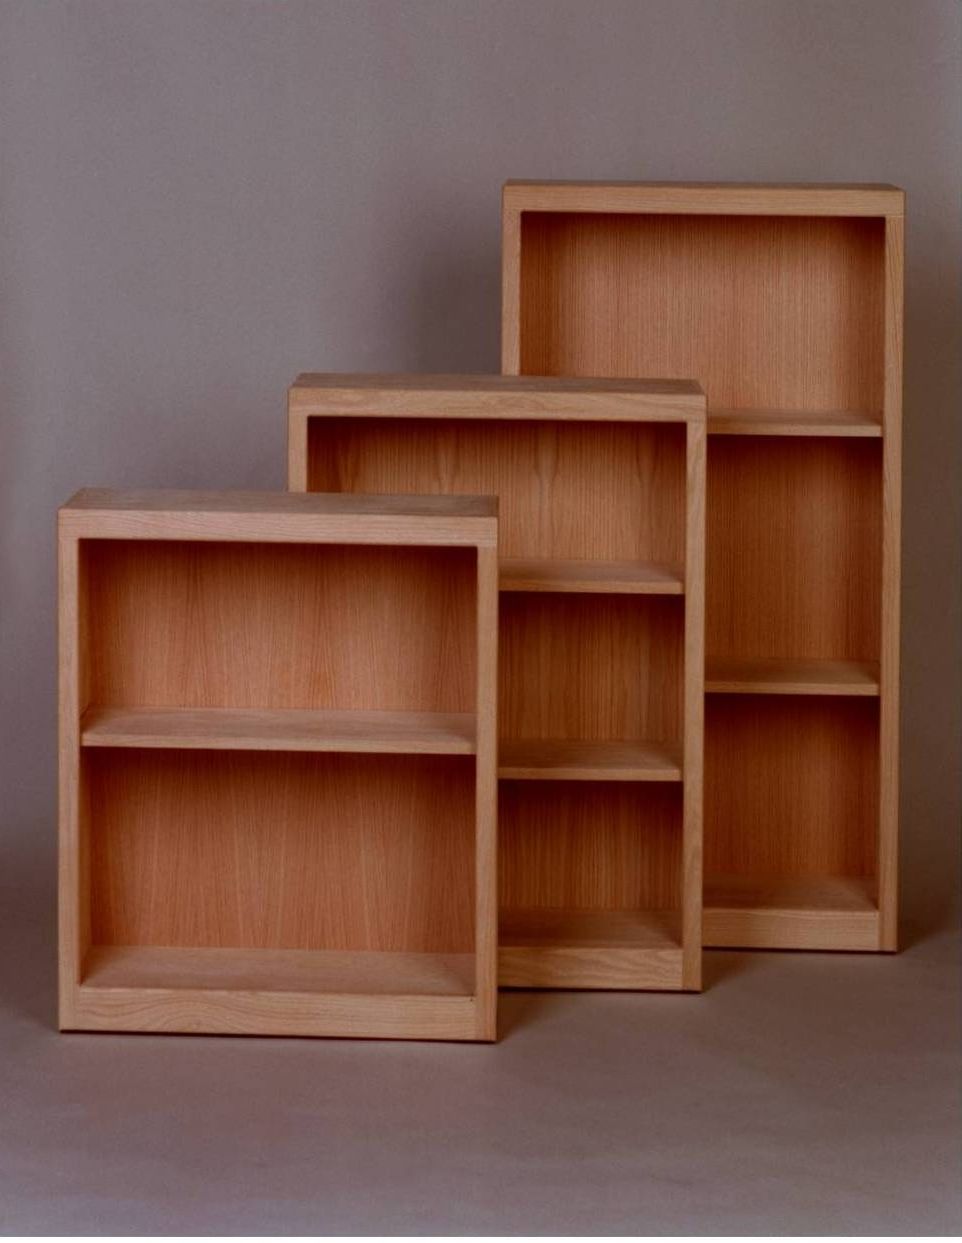 Current Contemporary Bookcase 10" Deep For Contemporary Oak Bookcases (View 9 of 15)